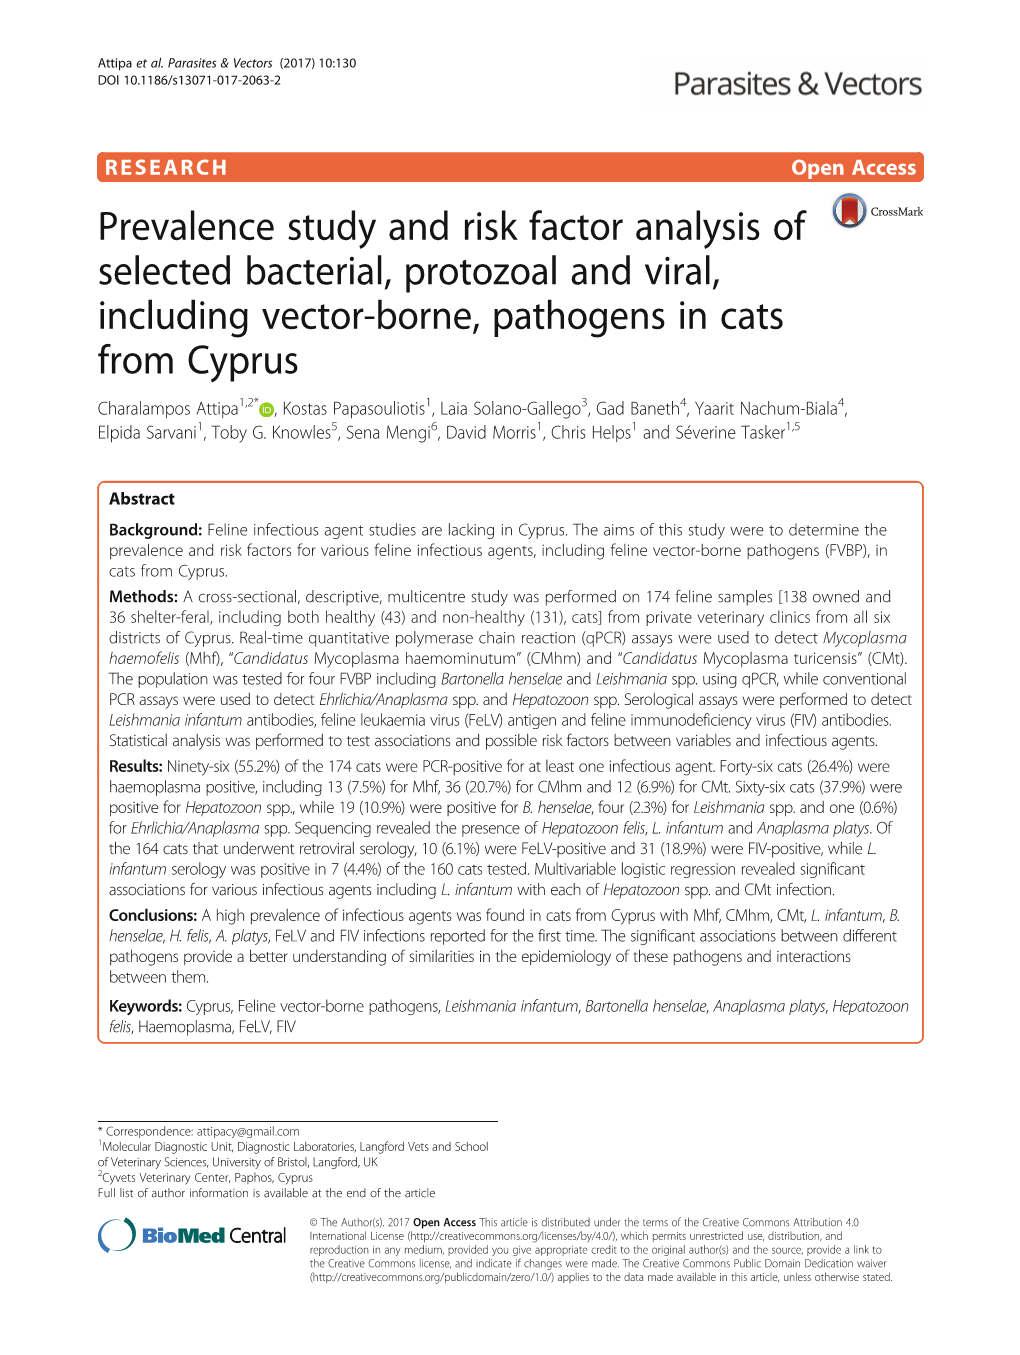 Prevalence Study and Risk Factor Analysis of Selected Bacterial